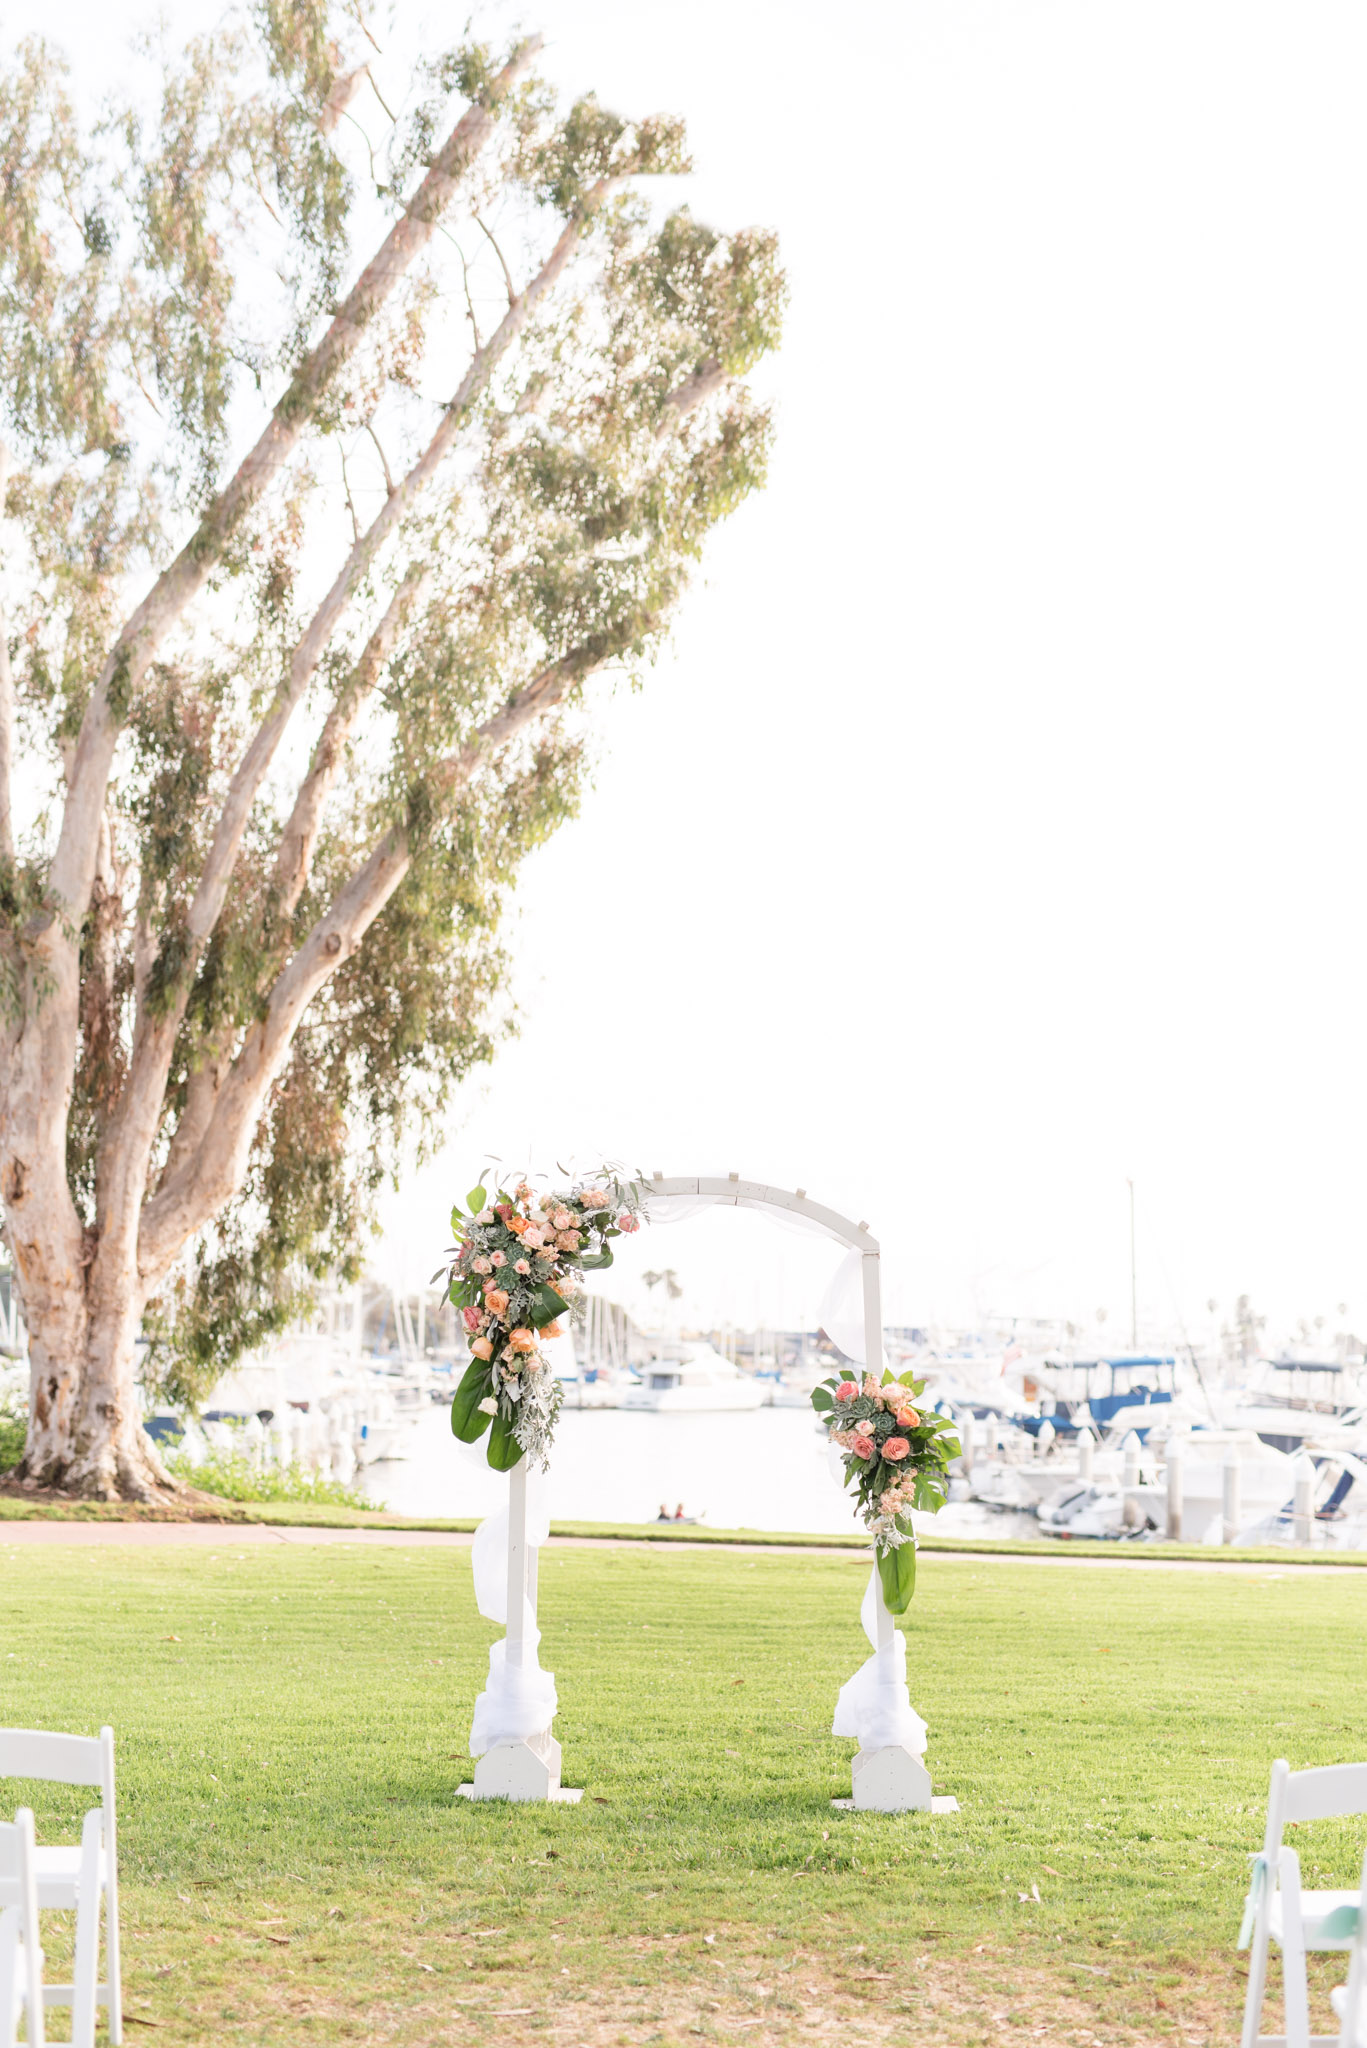 Wedding arch decorated with pink flowers.